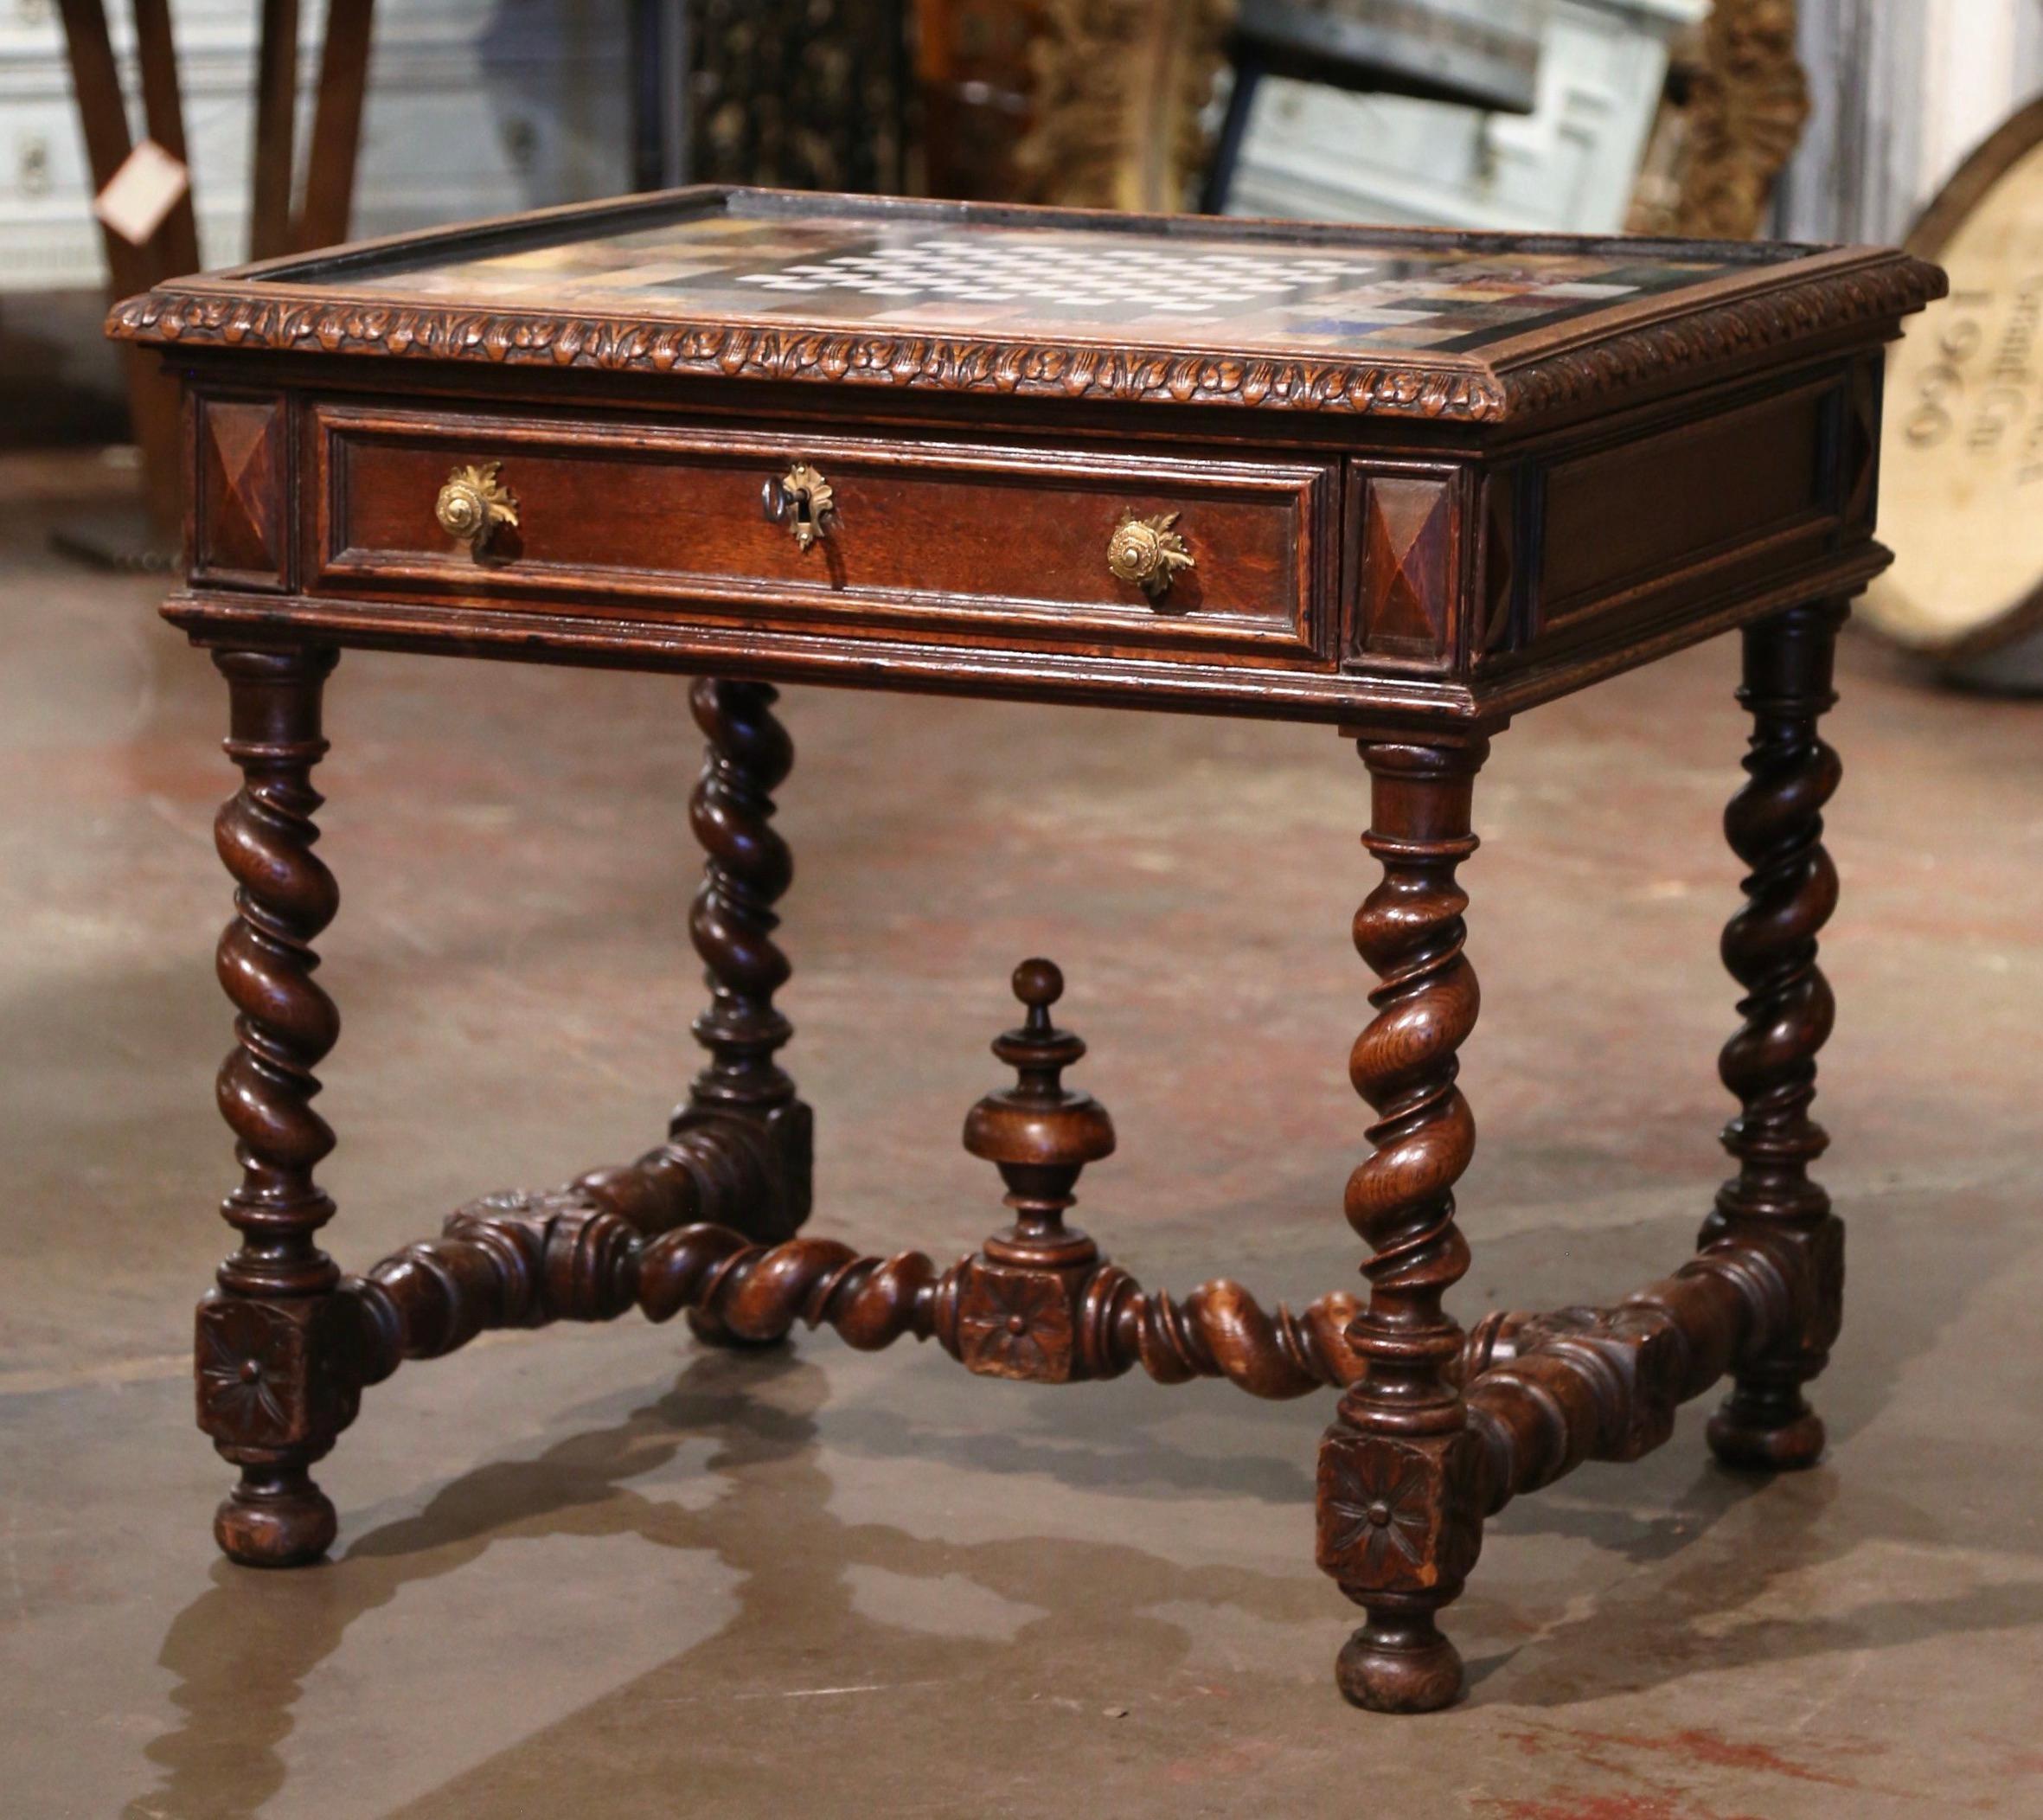 Decorate a den or game room with this elegant antique card table. Crafted in southern France circa 1780, the table stands on thick barley twist legs decorated with diamond shape medallions at the shoulder, and connected at the base with a twisted H